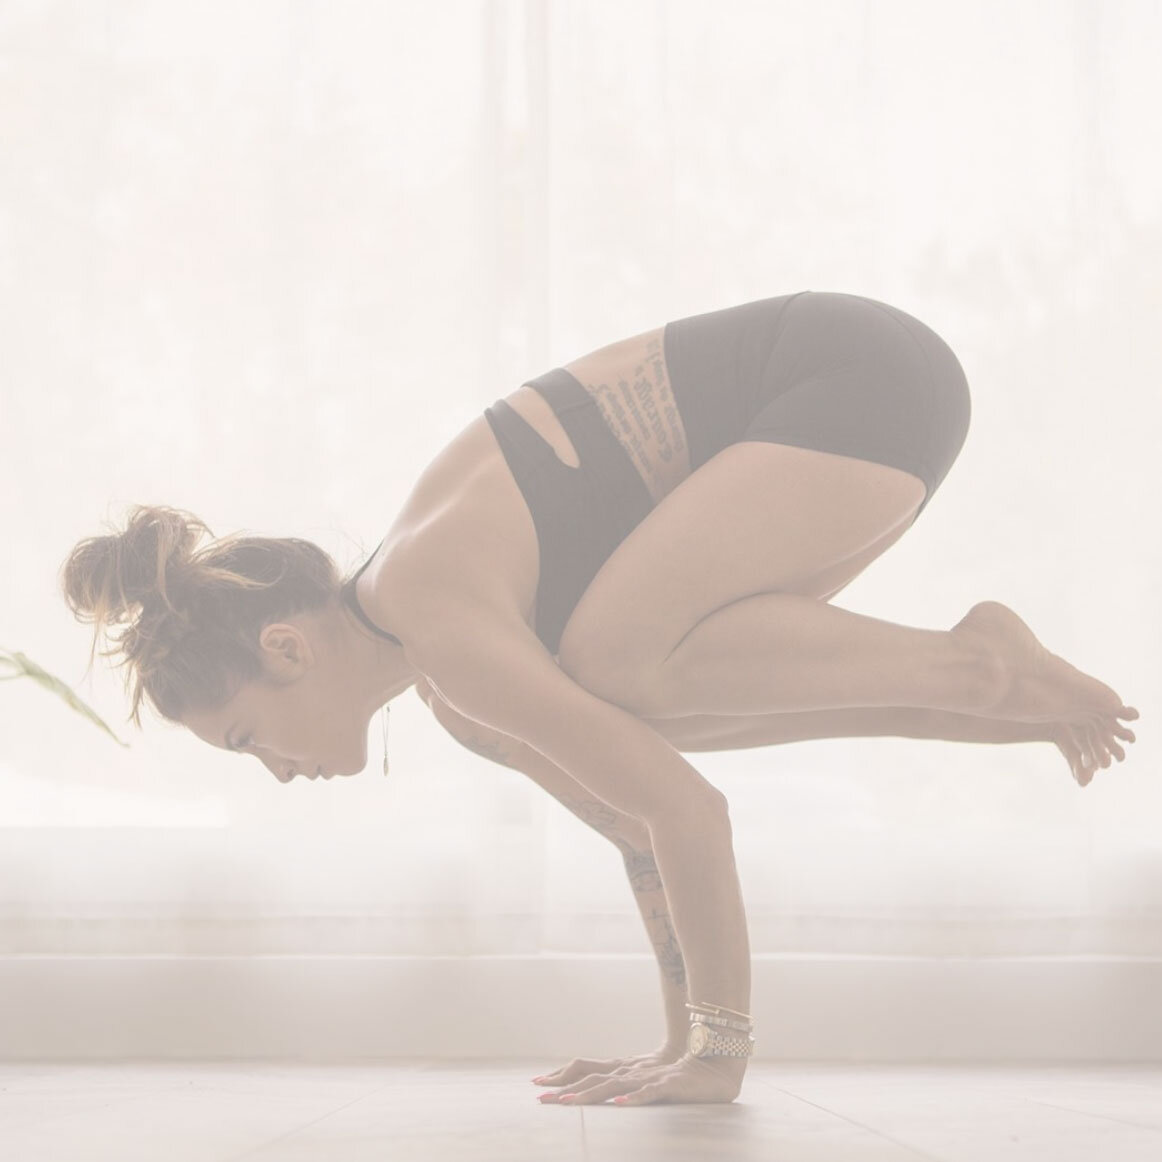 Learning How to Do Crow Pose? This Practice Will Teach You Everything You  Need to Know